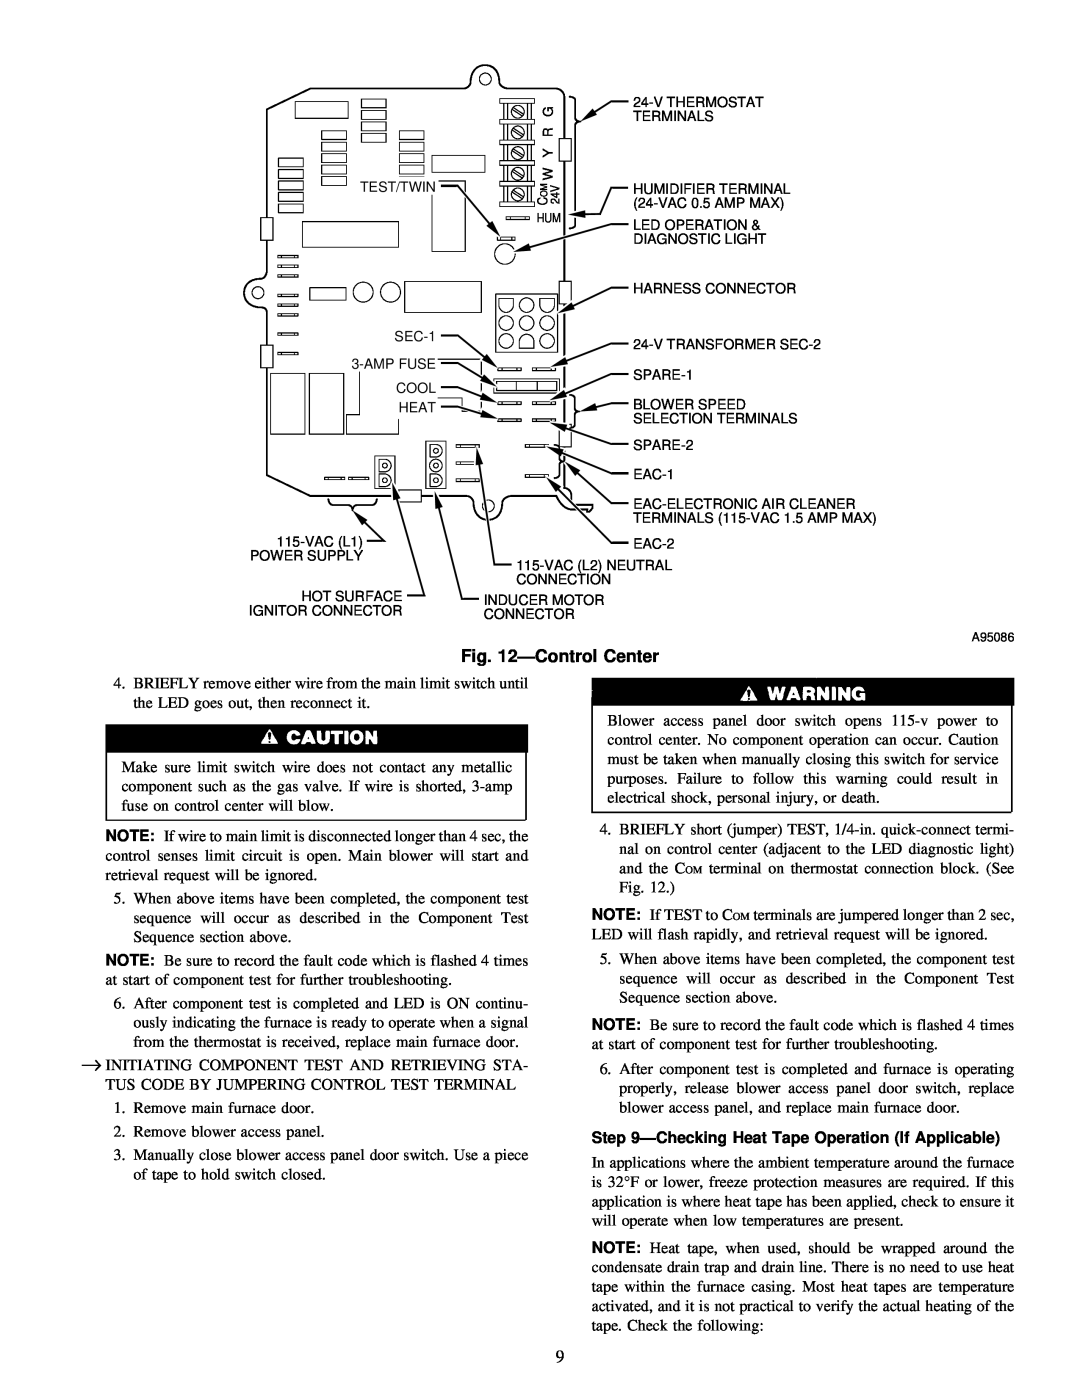 Carrier 58MSA instruction manual ÐControl Center, ÐChecking Heat Tape Operation If Applicable 